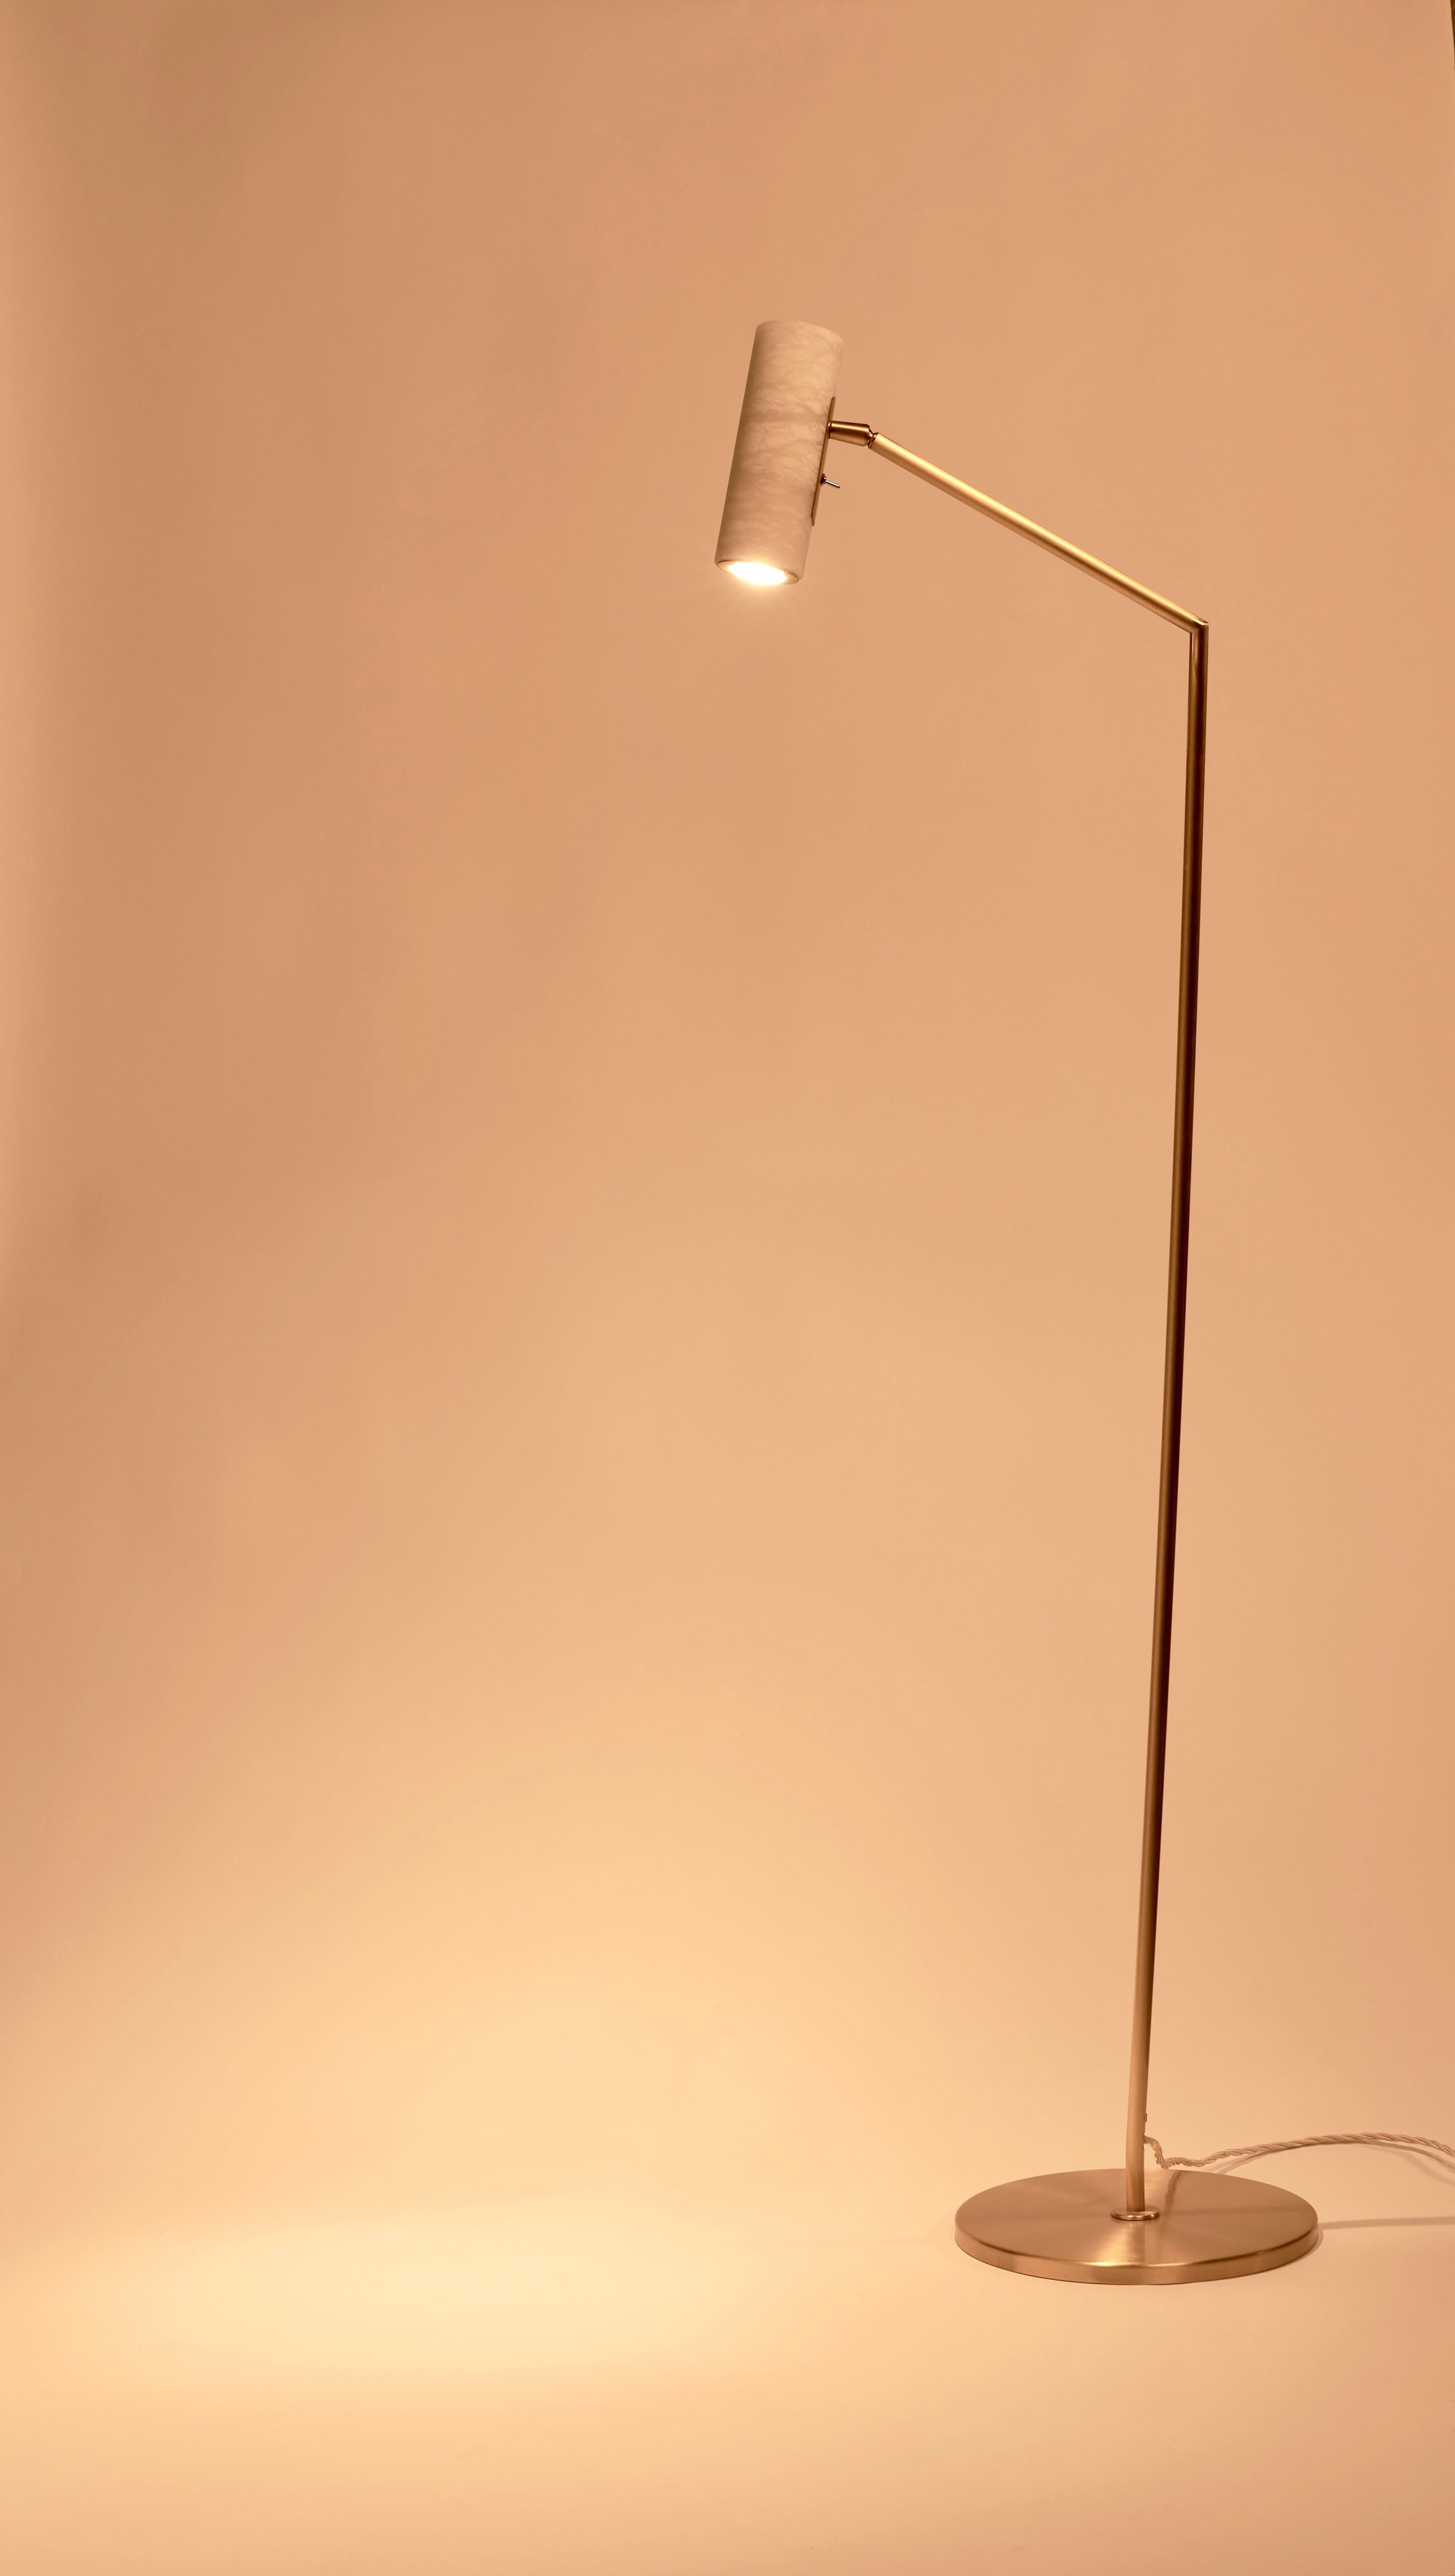 The Flamingo floor lamp is a handcrafted piece by Italian artisans, made using high-quality materials such as brass for the main structure and alabaster for the shade. The combination of these materials gives the lamp a stylish and elegant look that